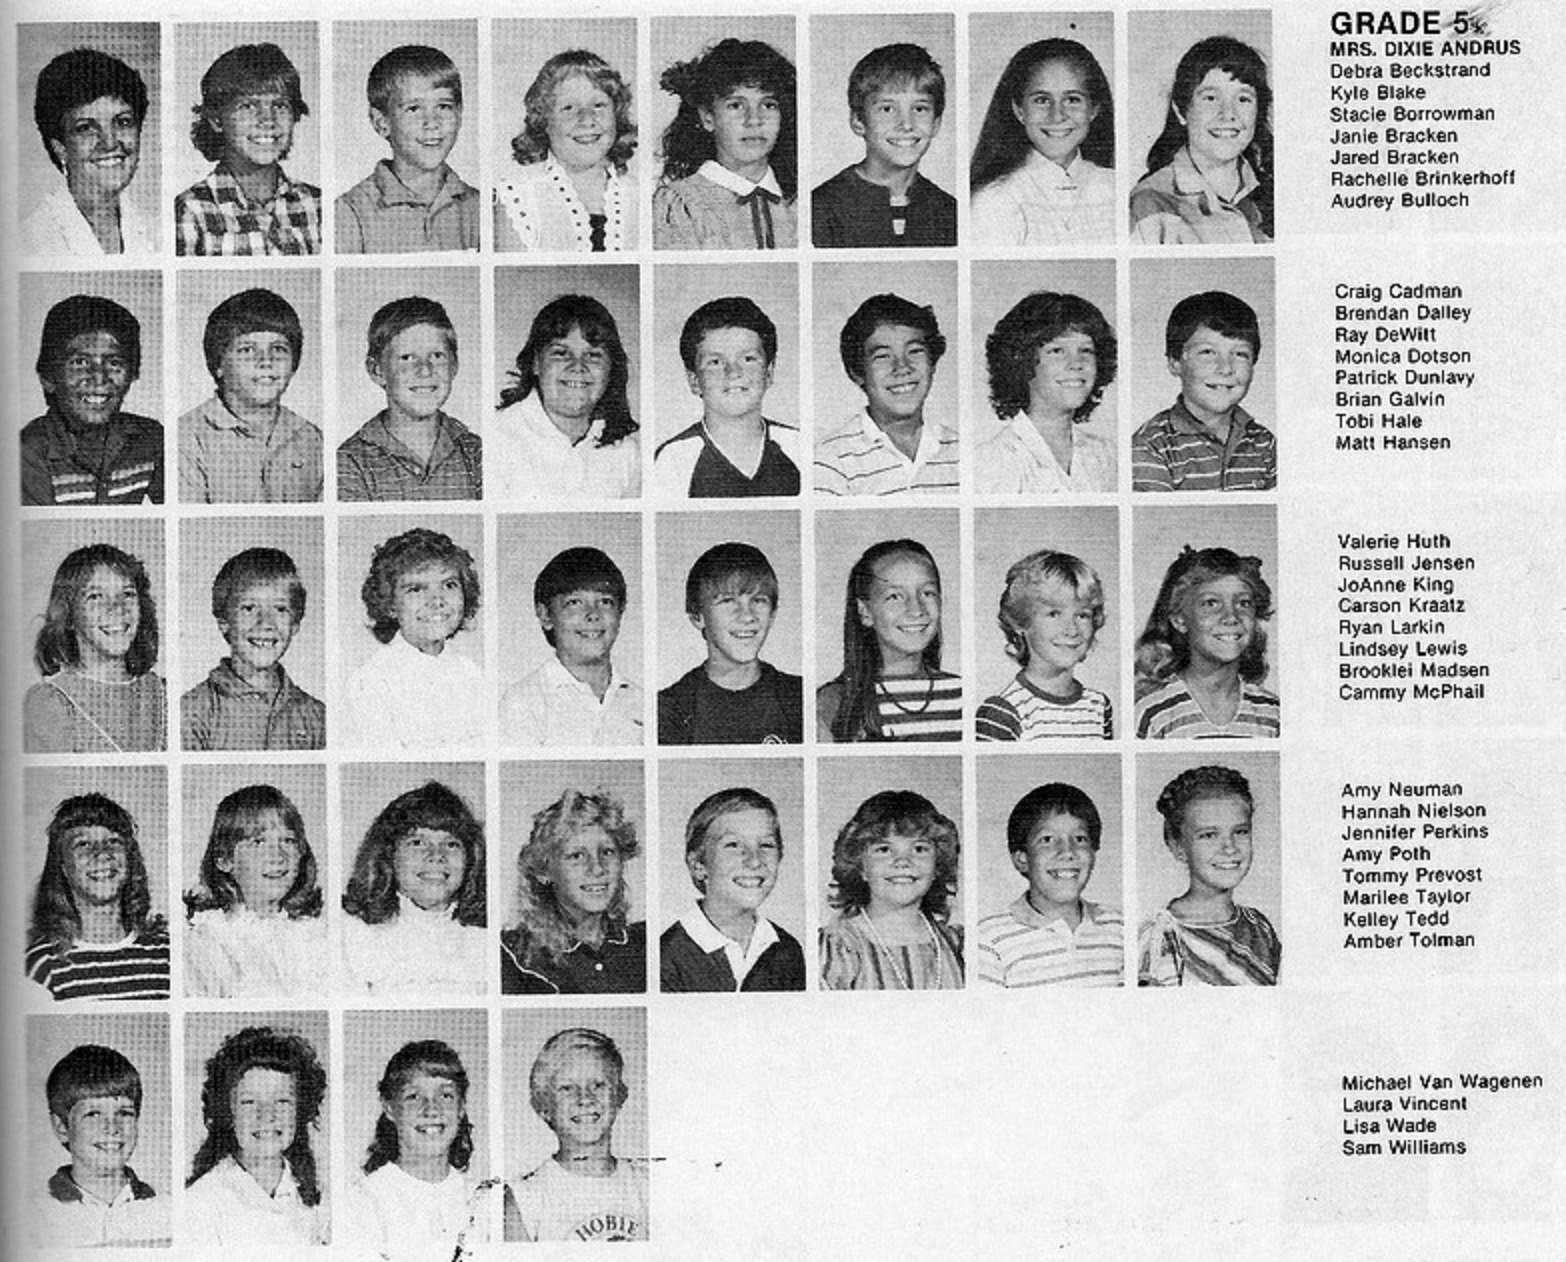 Mrs. Dixie Andrus' 1984-1985 fifth grade class at East Elementary School